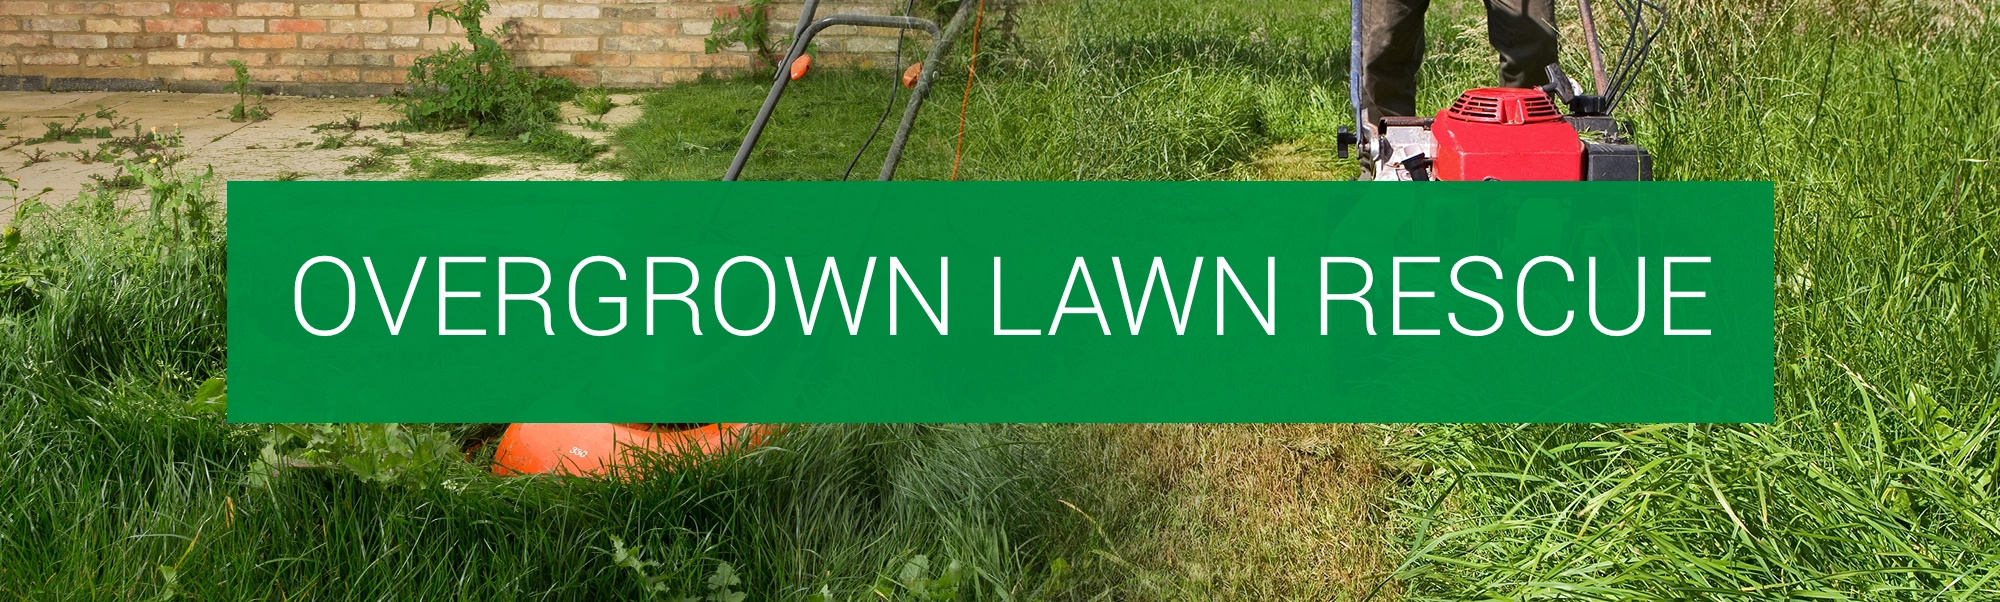 Lawn Care Services in South Carolina - Overgrown Lawn Rescue